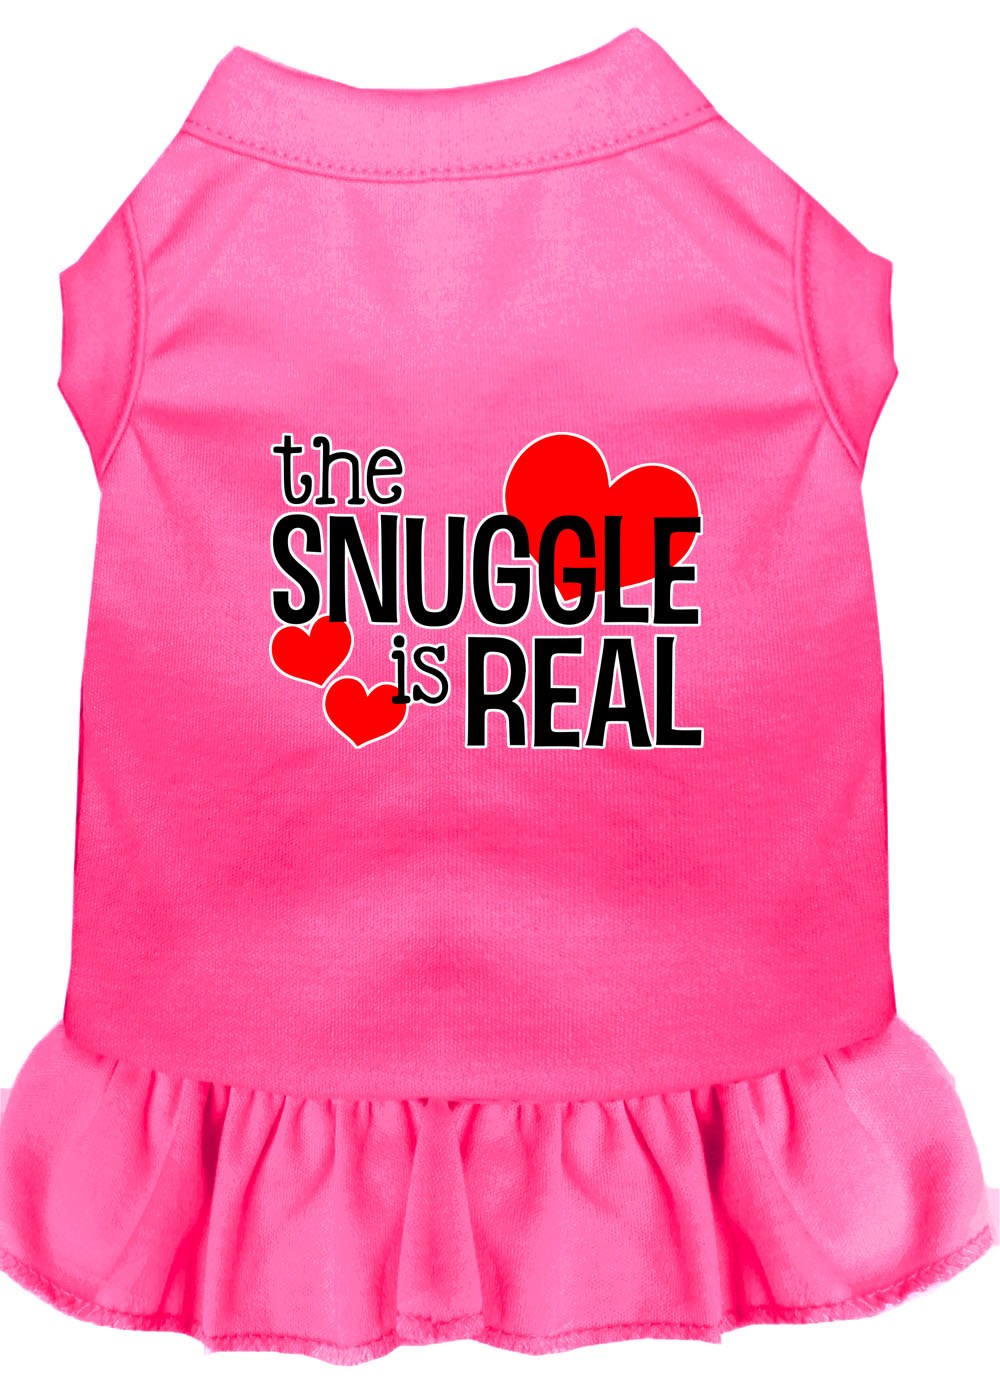 The Snuggle is Real Screen Print Dog Dress Bright Pink XXL